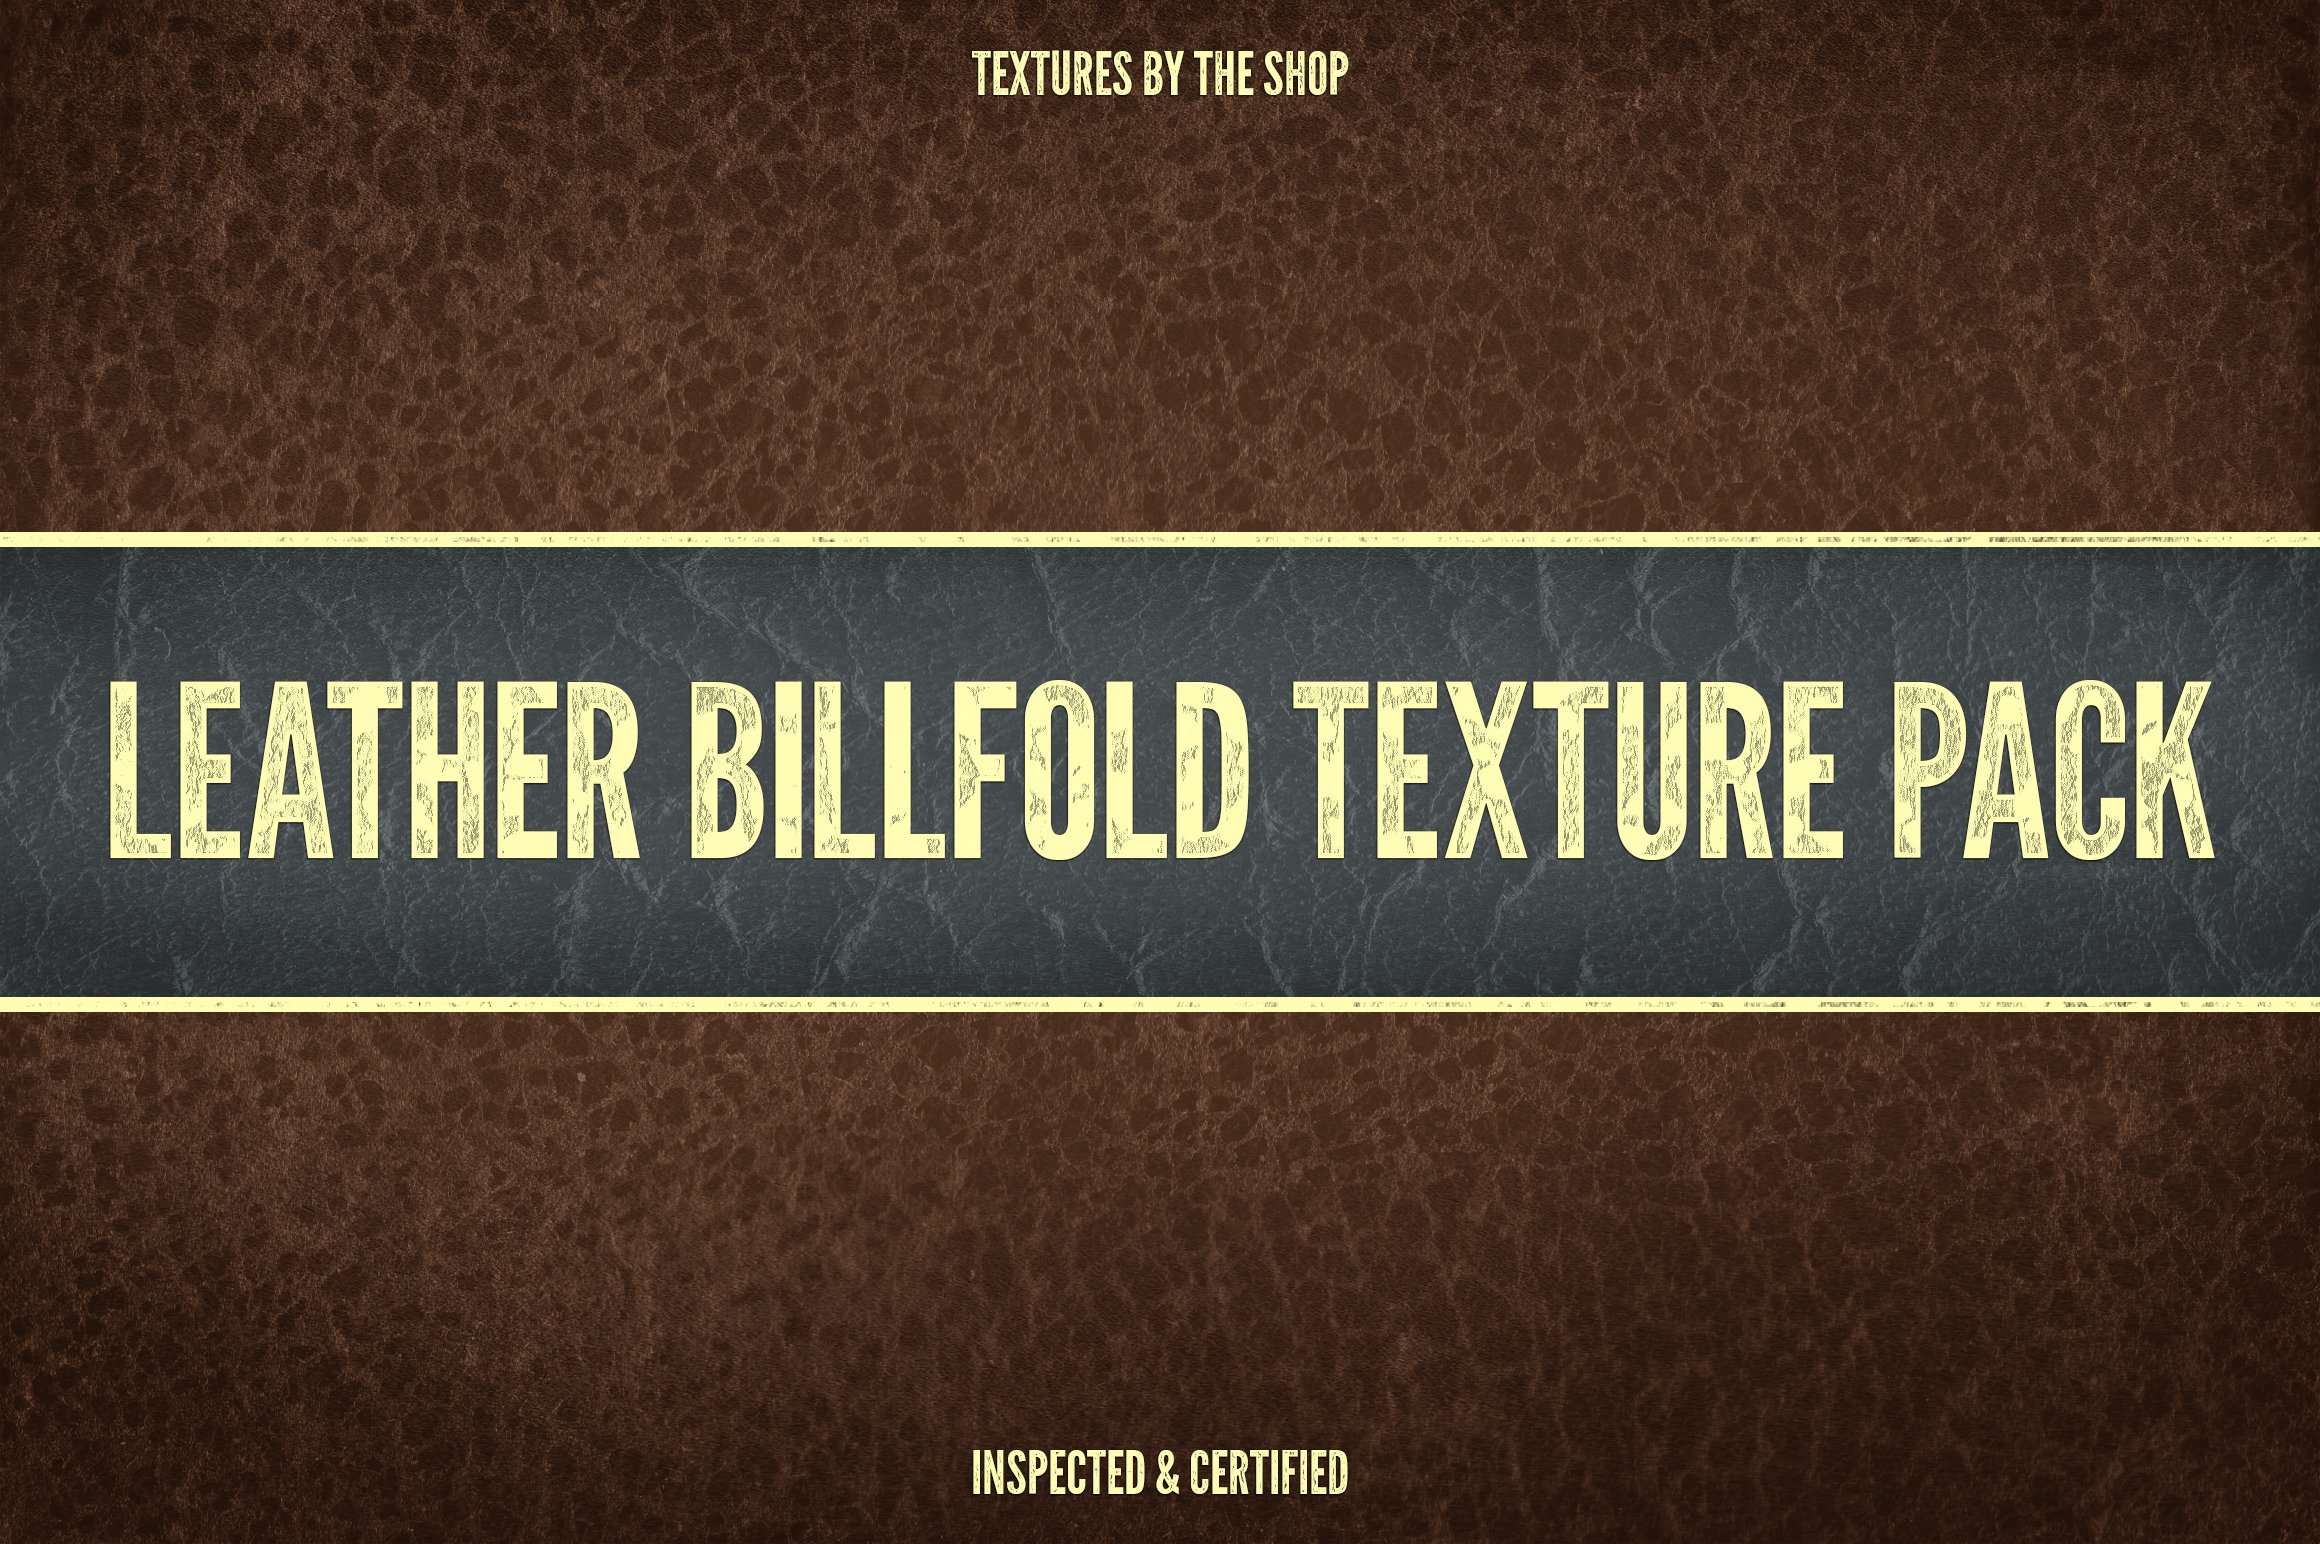 Leather billfold texture pack cover image.